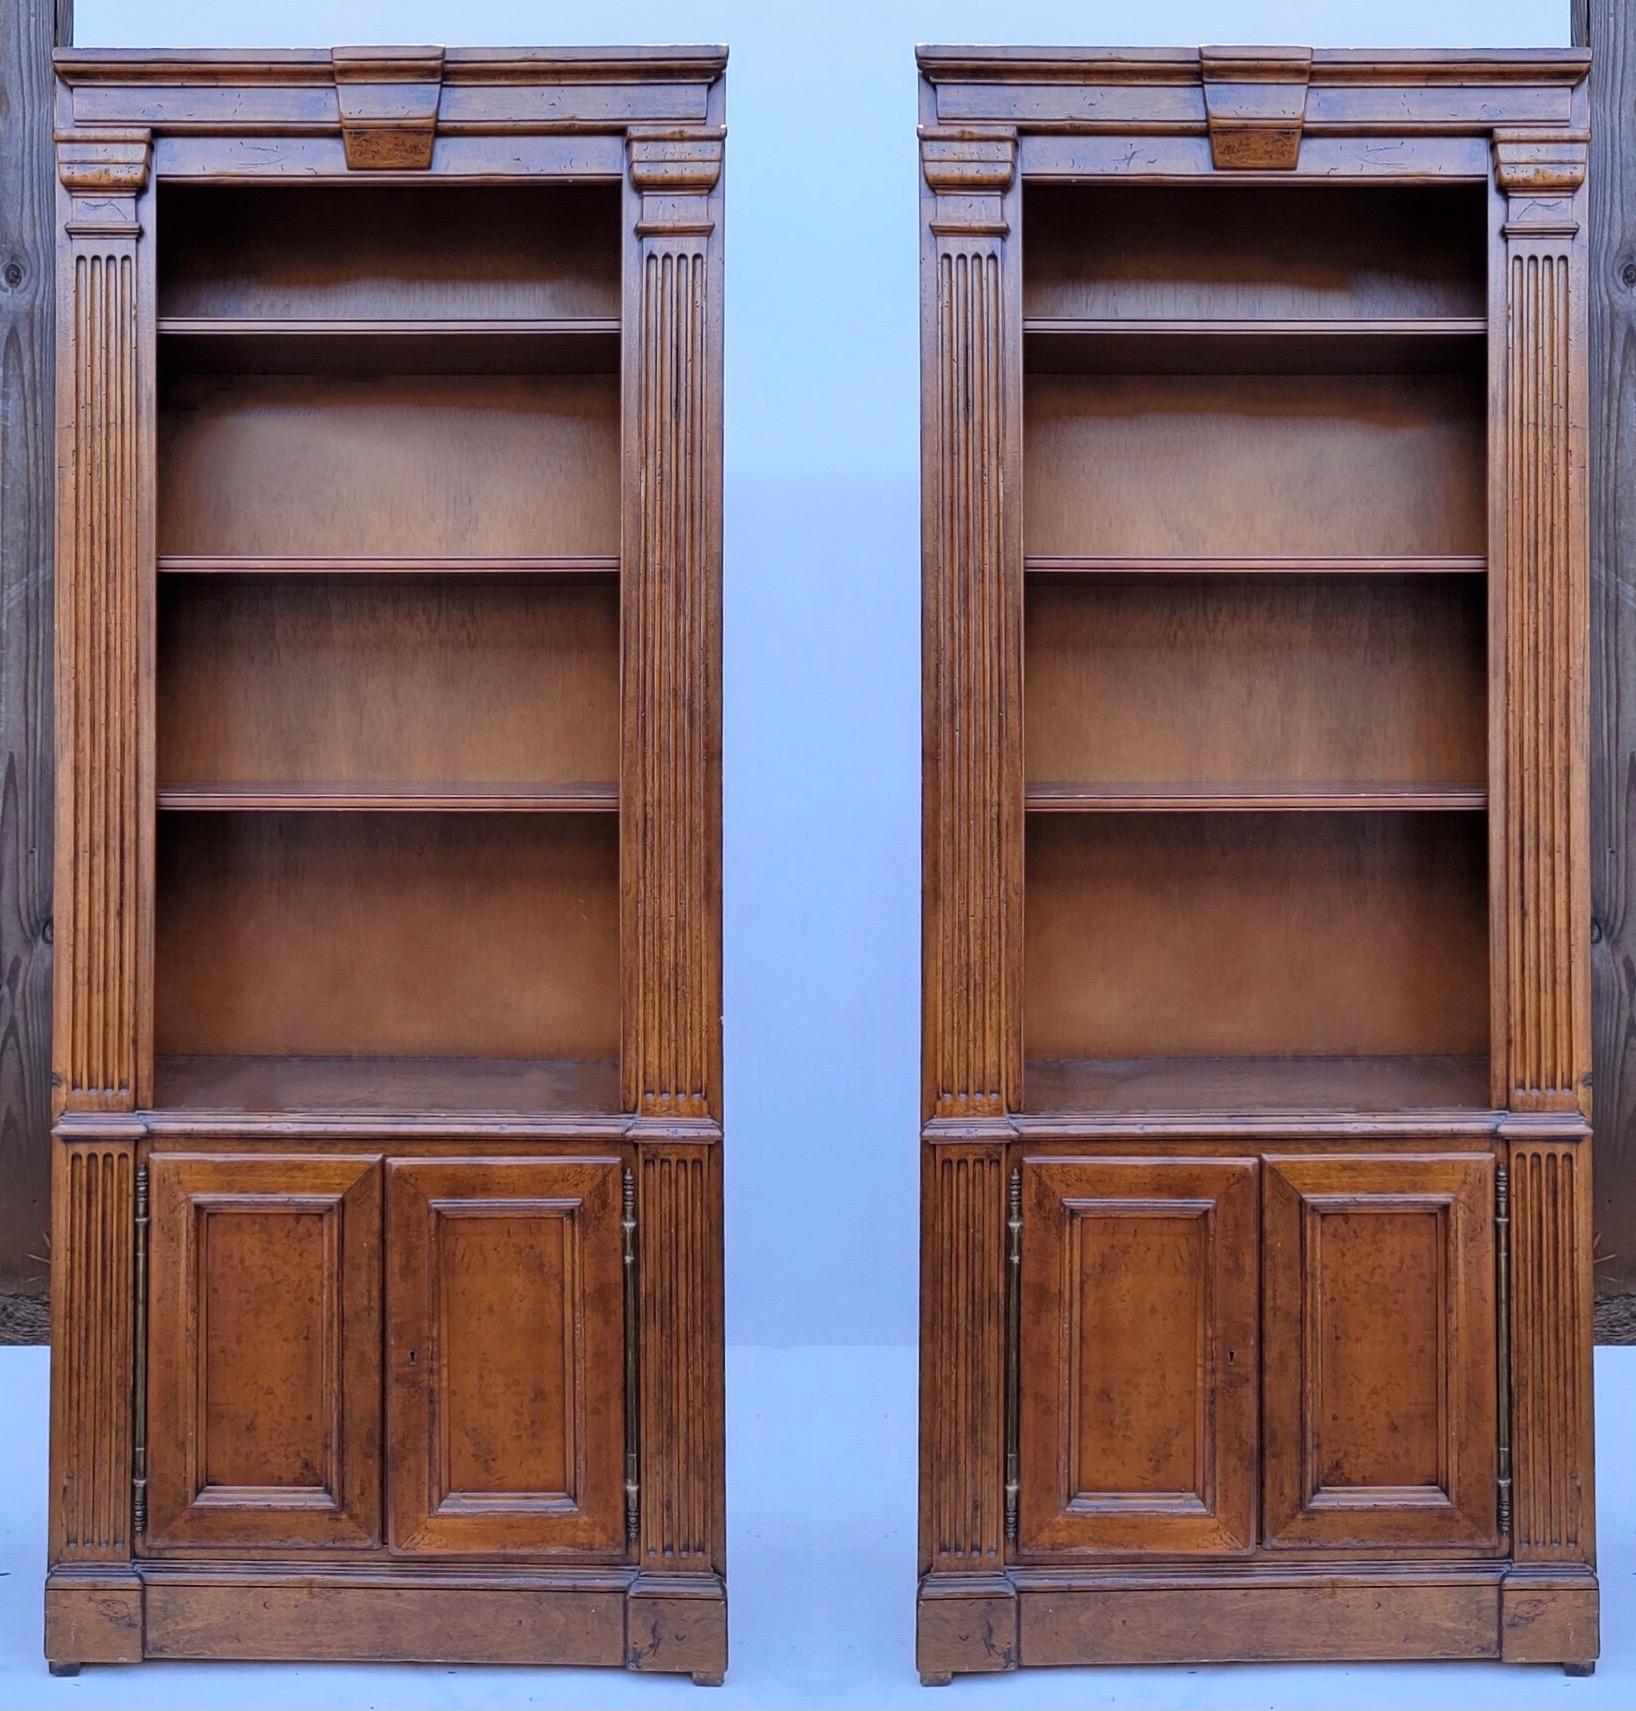 This is an amazing pair of French neo-classical style bookcases hand crafted by the Italian designer Guido Zichele for Bloomingdales. Note the elongated 19th century French style hinges ! They do have keys, and the shelves are adjustable. They are